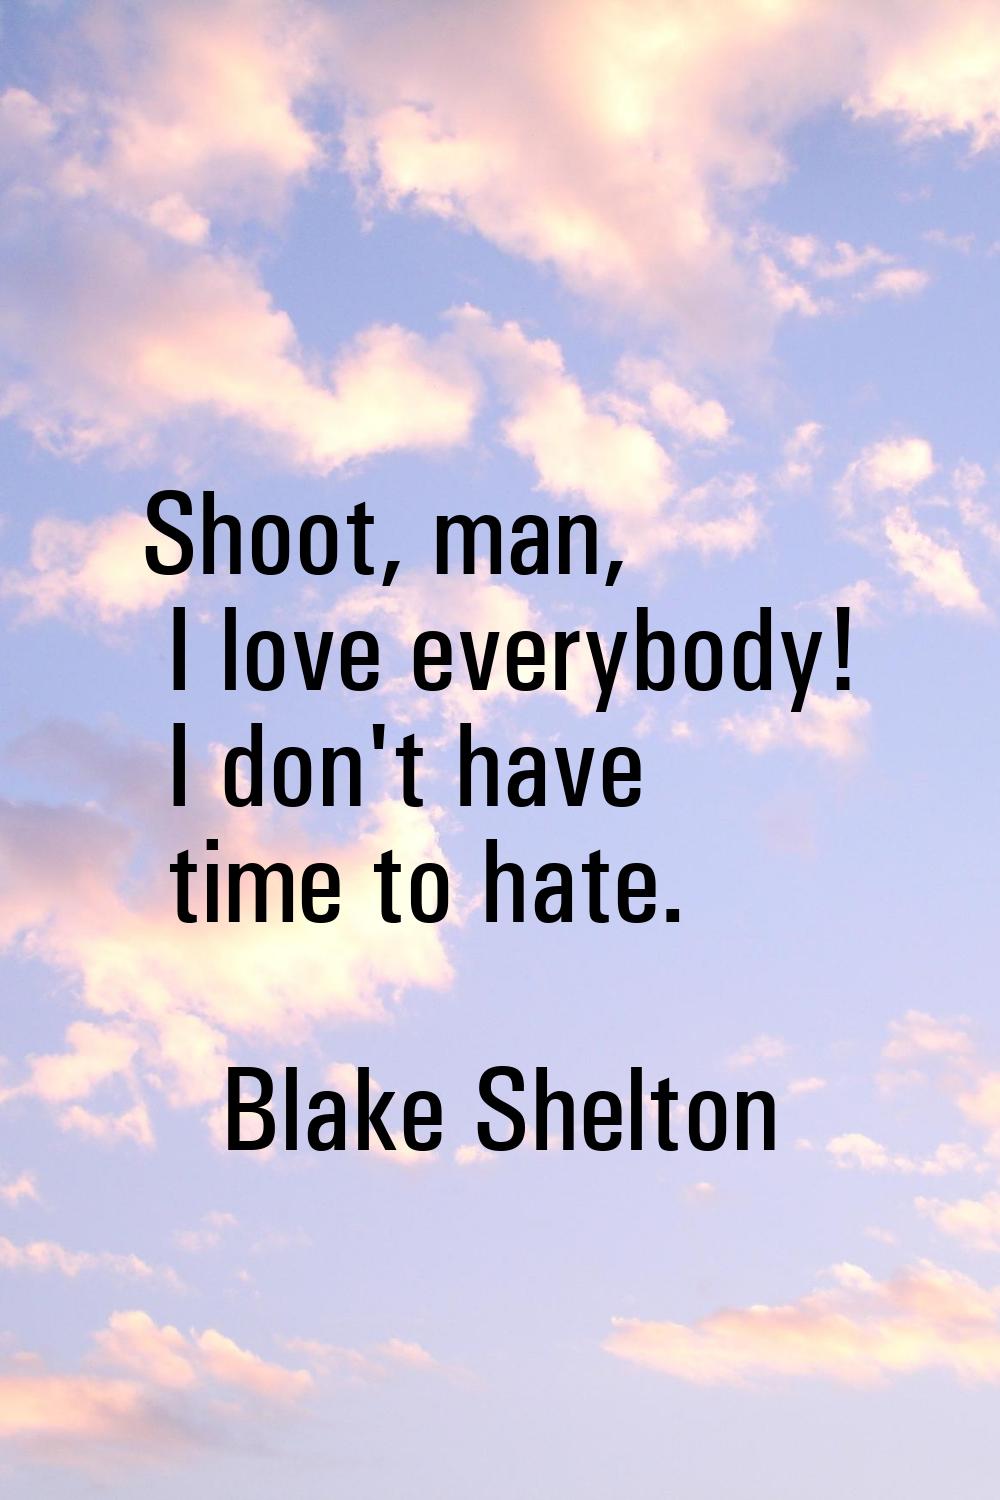 Shoot, man, I love everybody! I don't have time to hate.